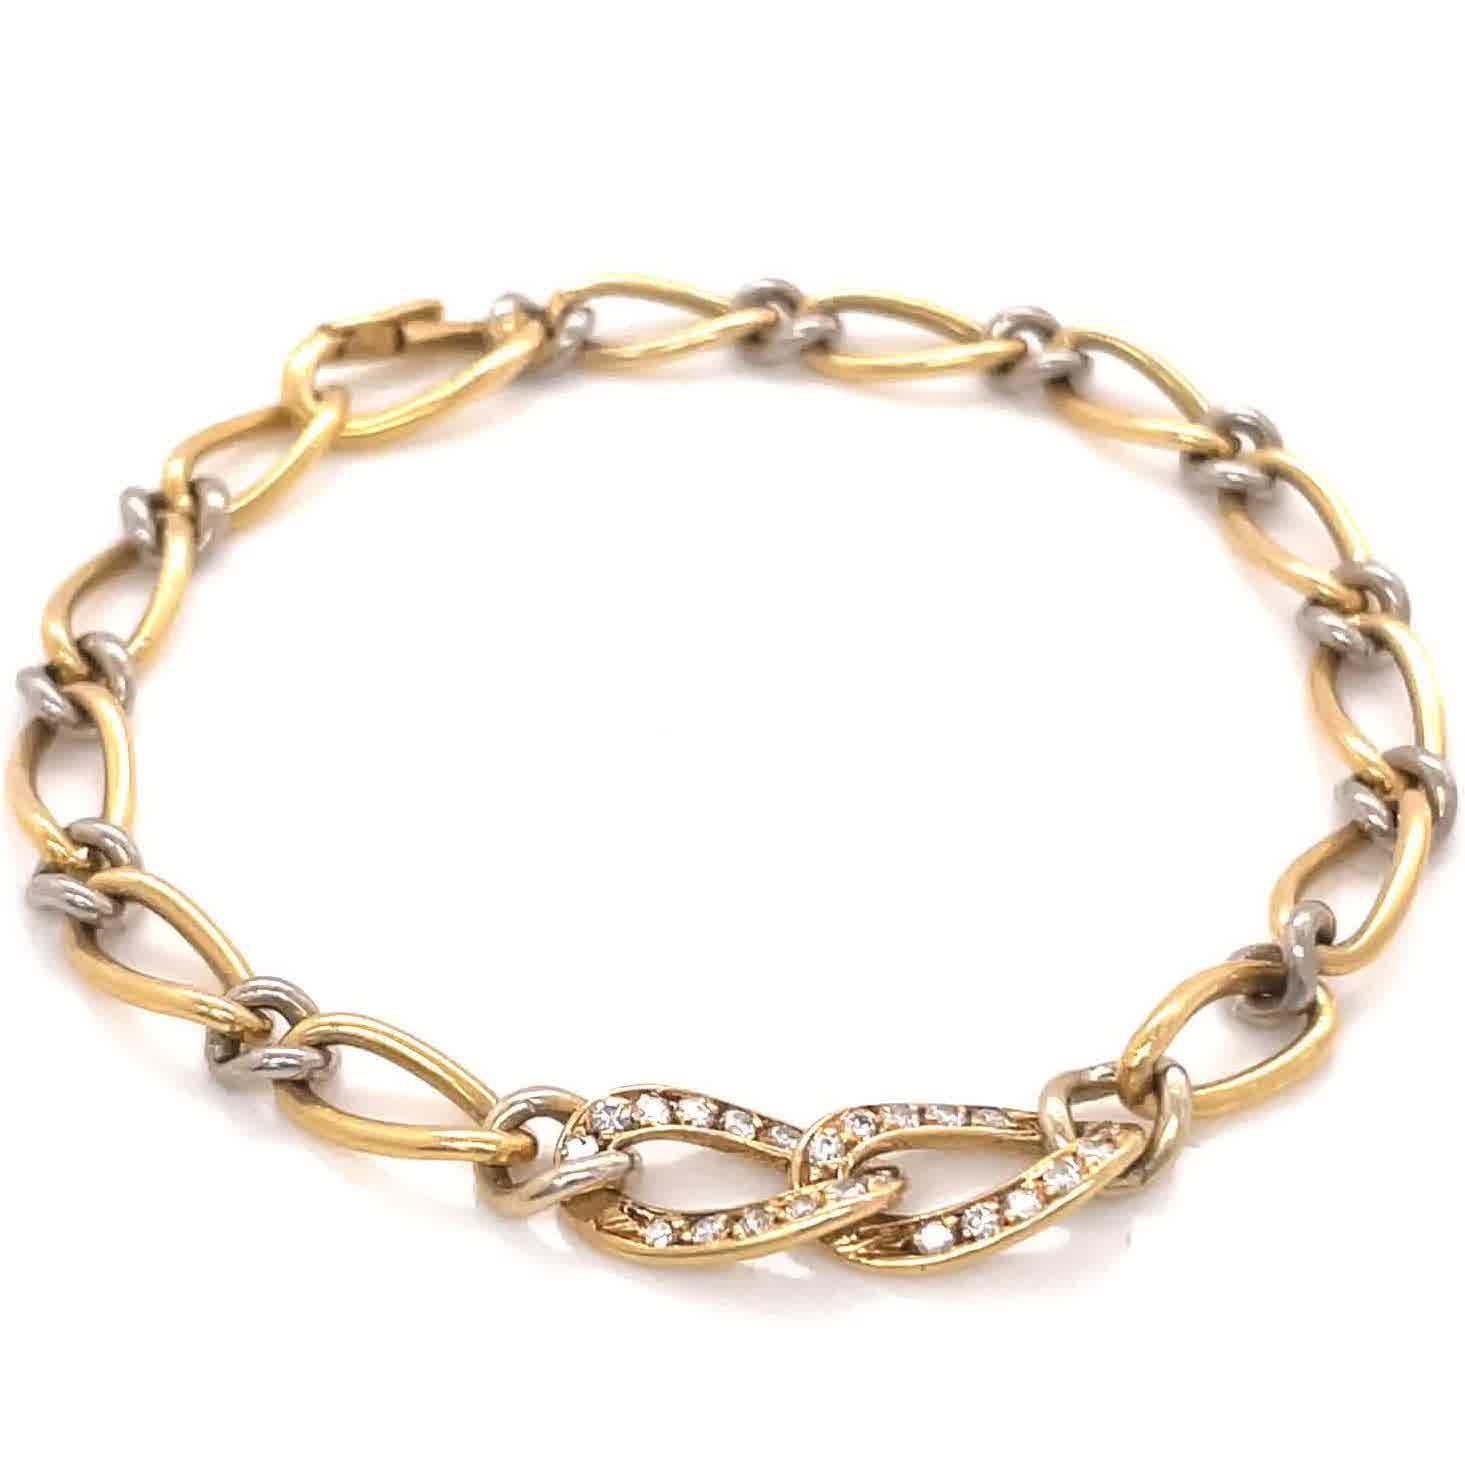 You'll find that everything about this Vintage Cartier Diamond 18k Gold Chain Link Bracelet is perfect. It's vintage, timeless & classic, wonderful for everyday wear, and would be an amazing gift for a loved one or yourself. The bracelet is accented